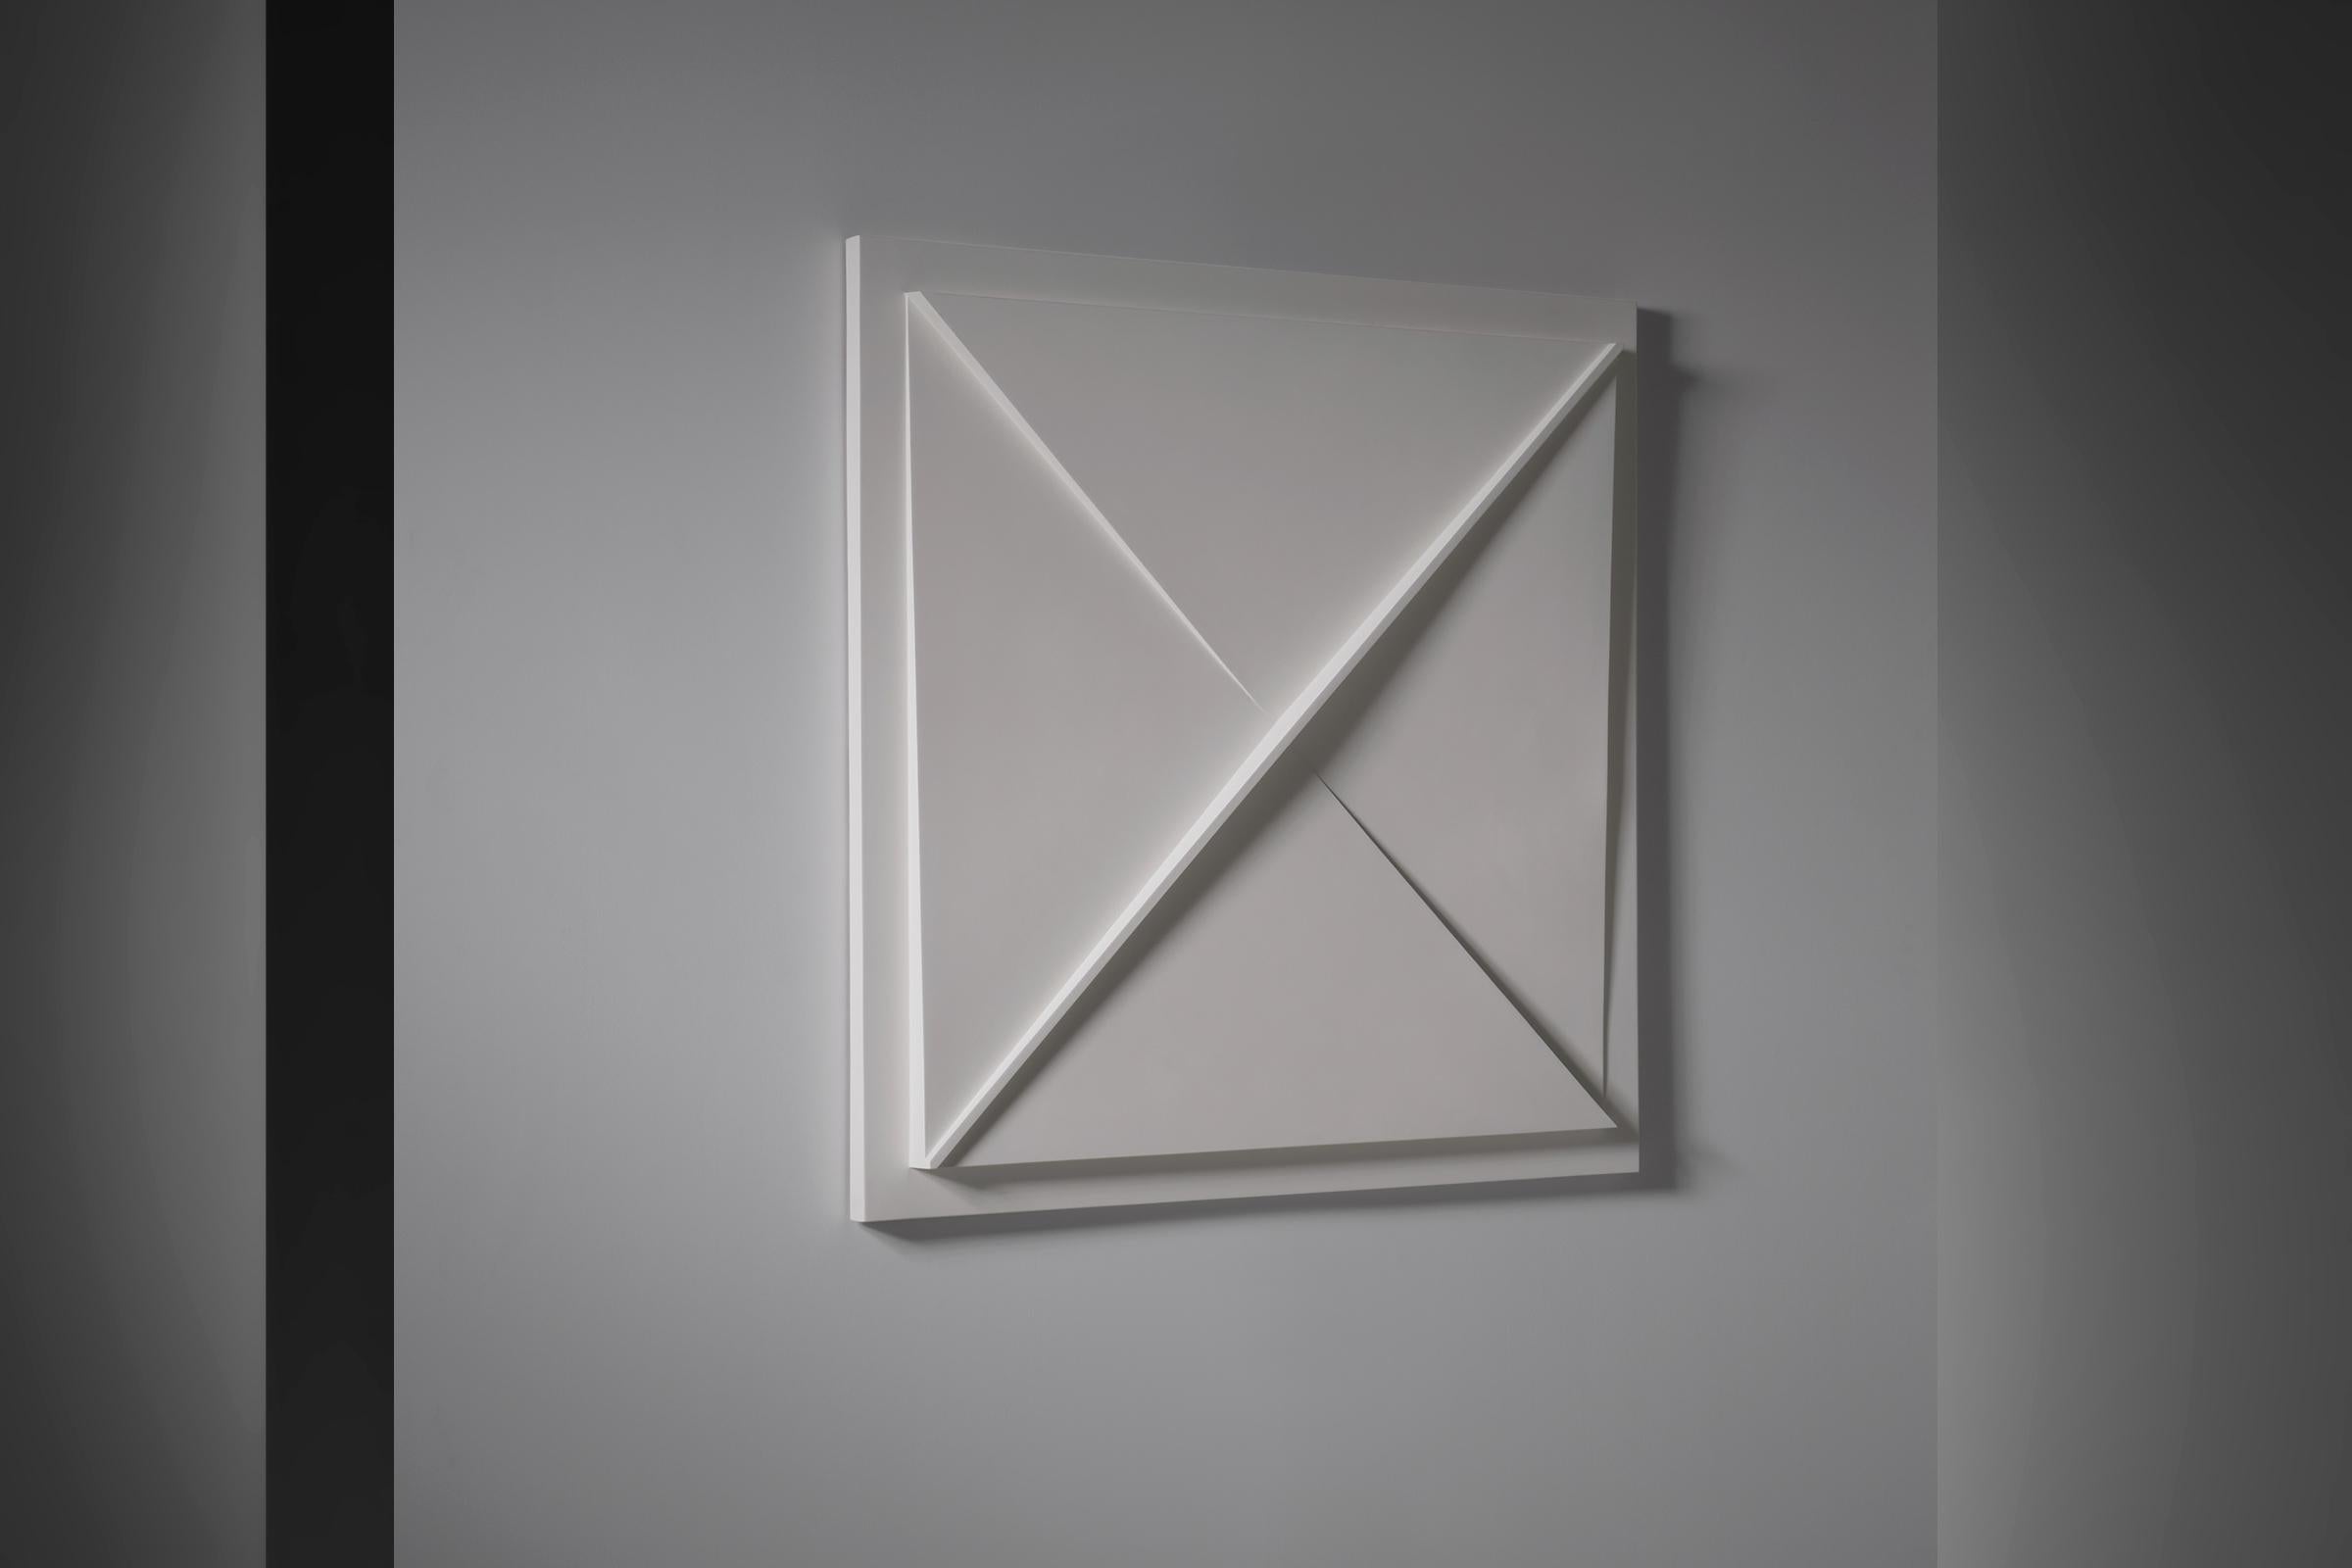 Geometric wall relief by Henk van der Plas (1936-2009), The Netherlands 1974. Van der Plas was educated at the Royal Academy of Arts in The Hague. His work is characterized by monochromy, repetition in rhythm and regularity and the use of modern